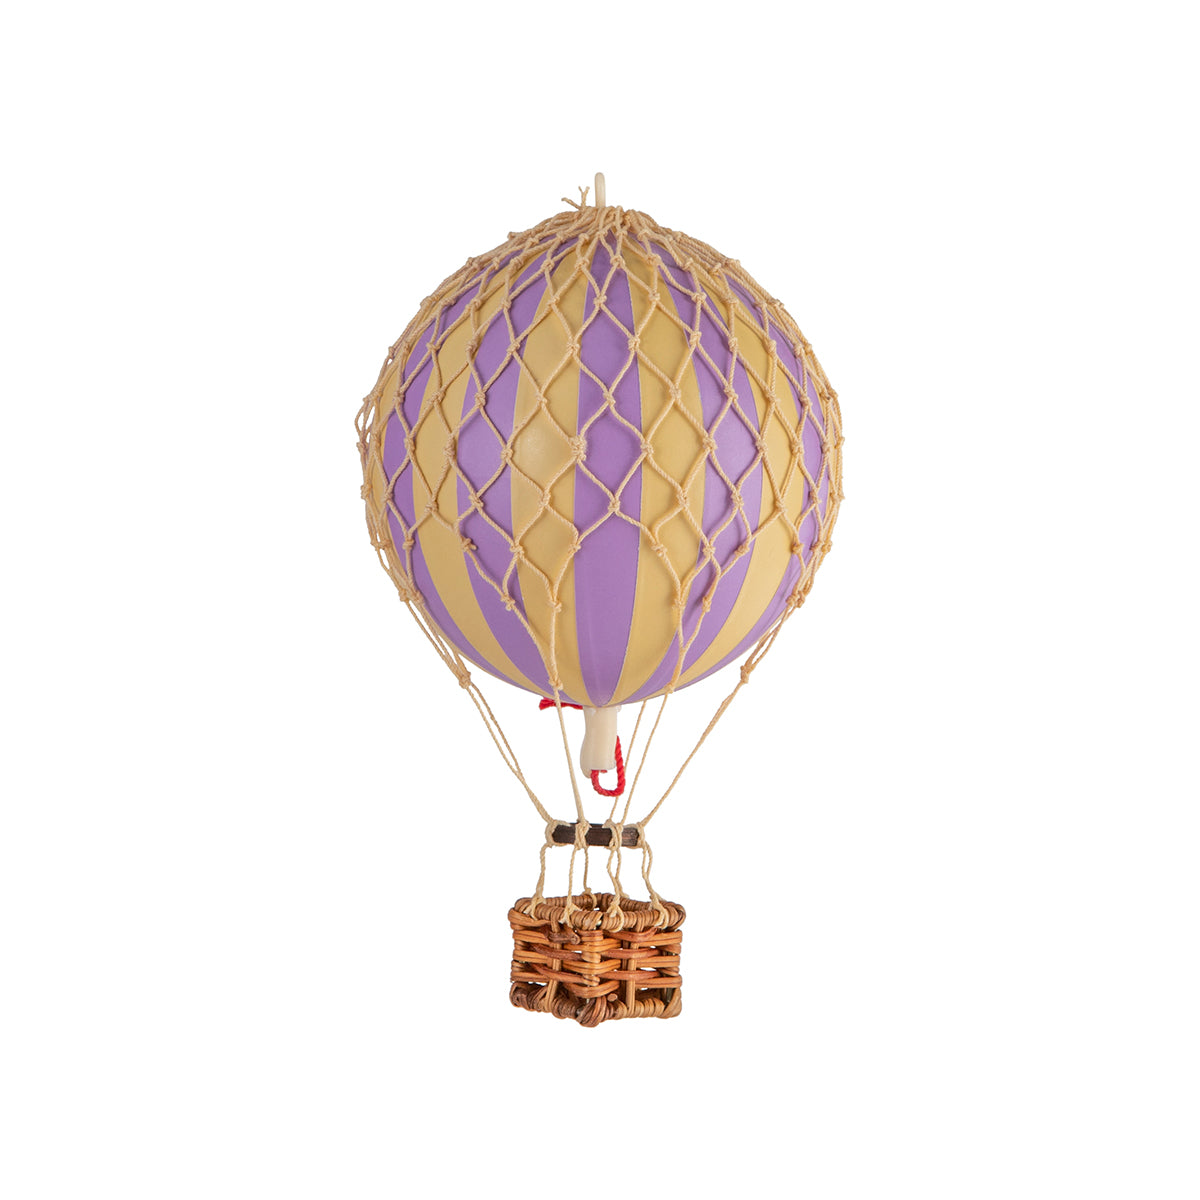 Embark on a whimsical journey aboard the Wonderen Extra Small Hot Air Balloon - Floating The Skies, complete with a delightful basket! Experience the magic of soaring through the skies on this enchanting adventure by Wonderen Stroopwafels.